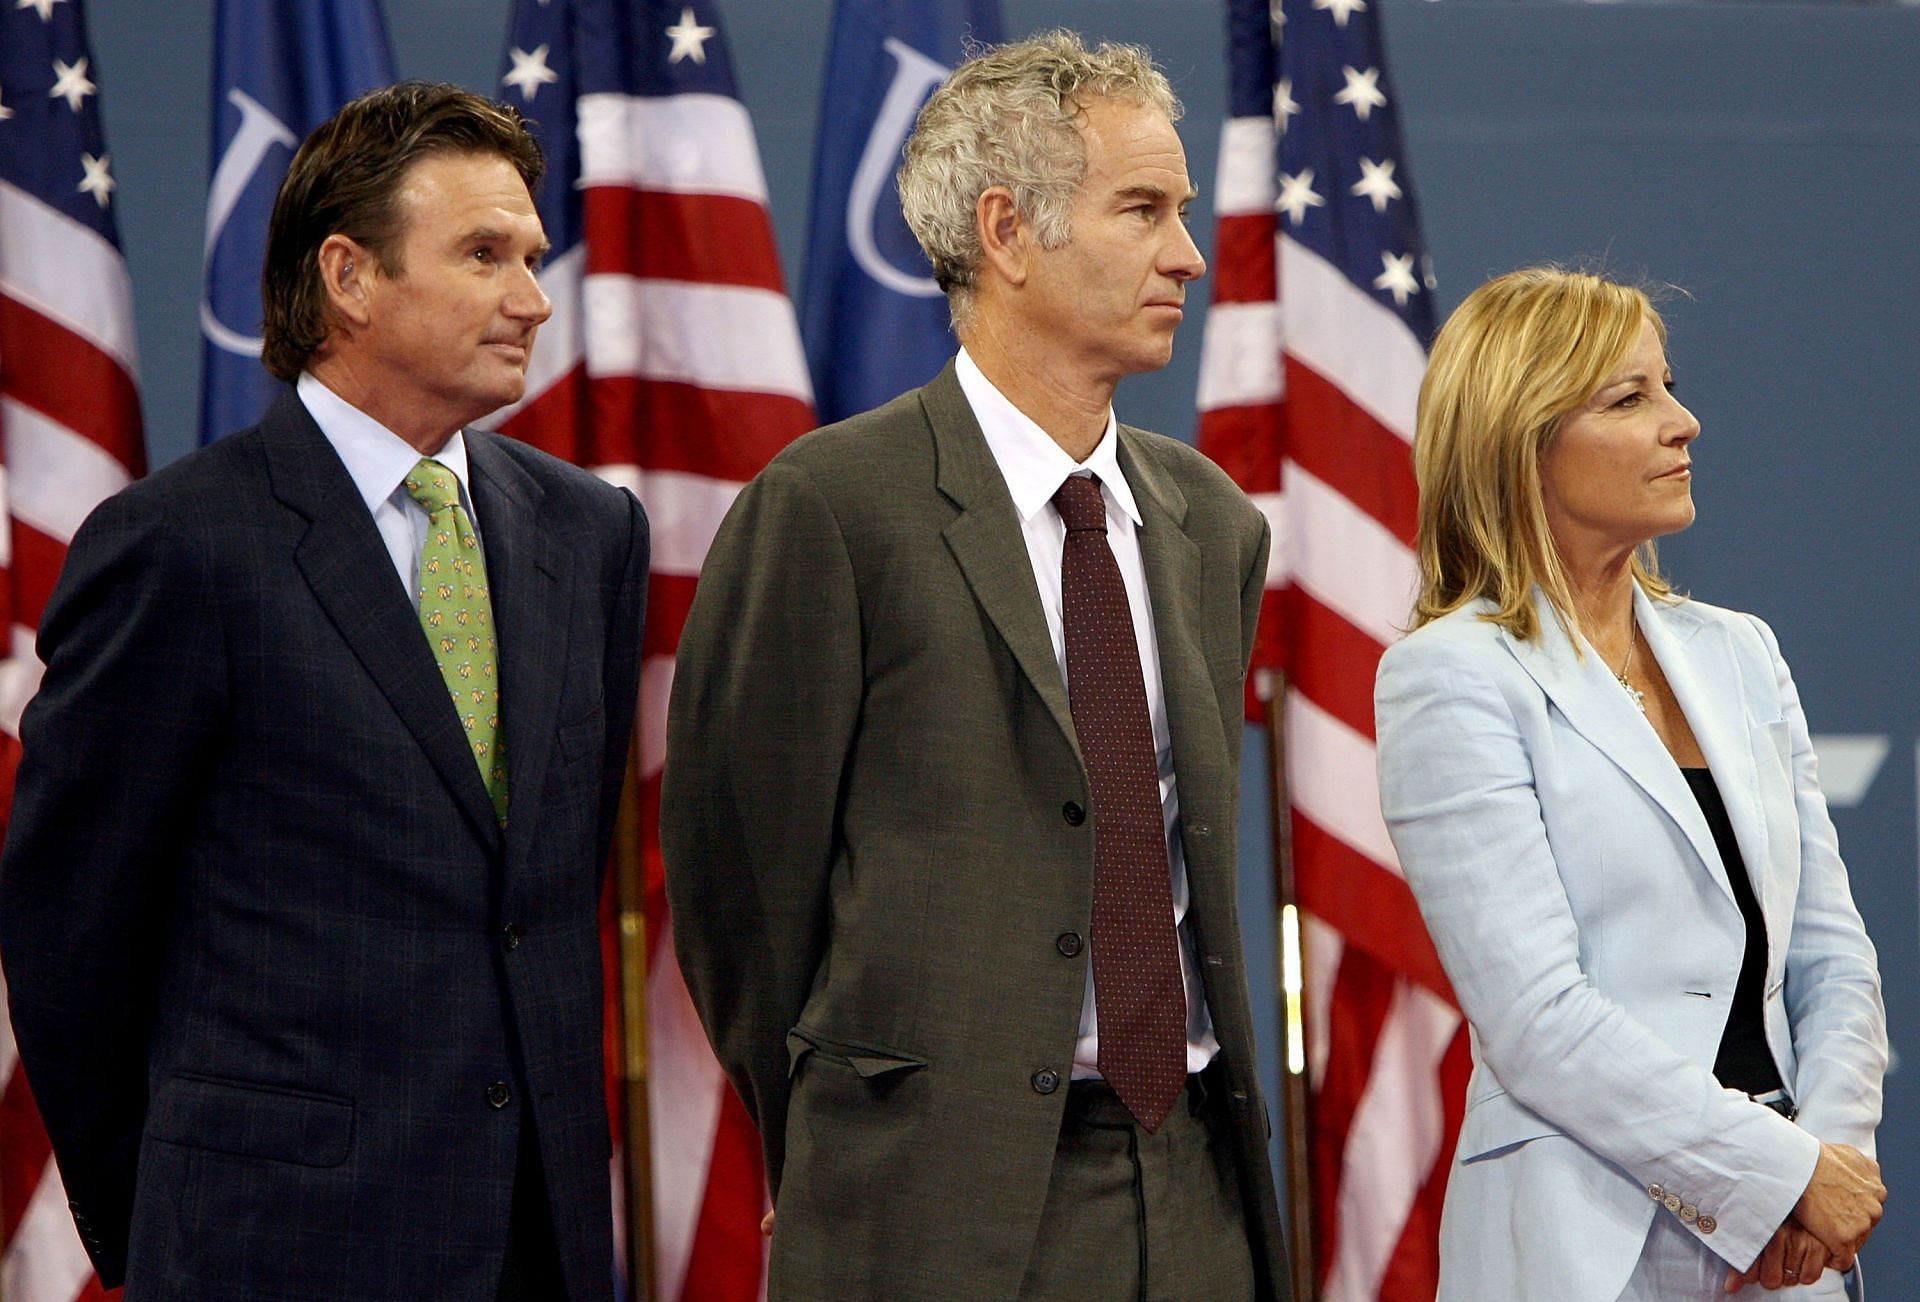 Chris Evert and Jimmy Connors with John McEnroe at the 2006 US Open